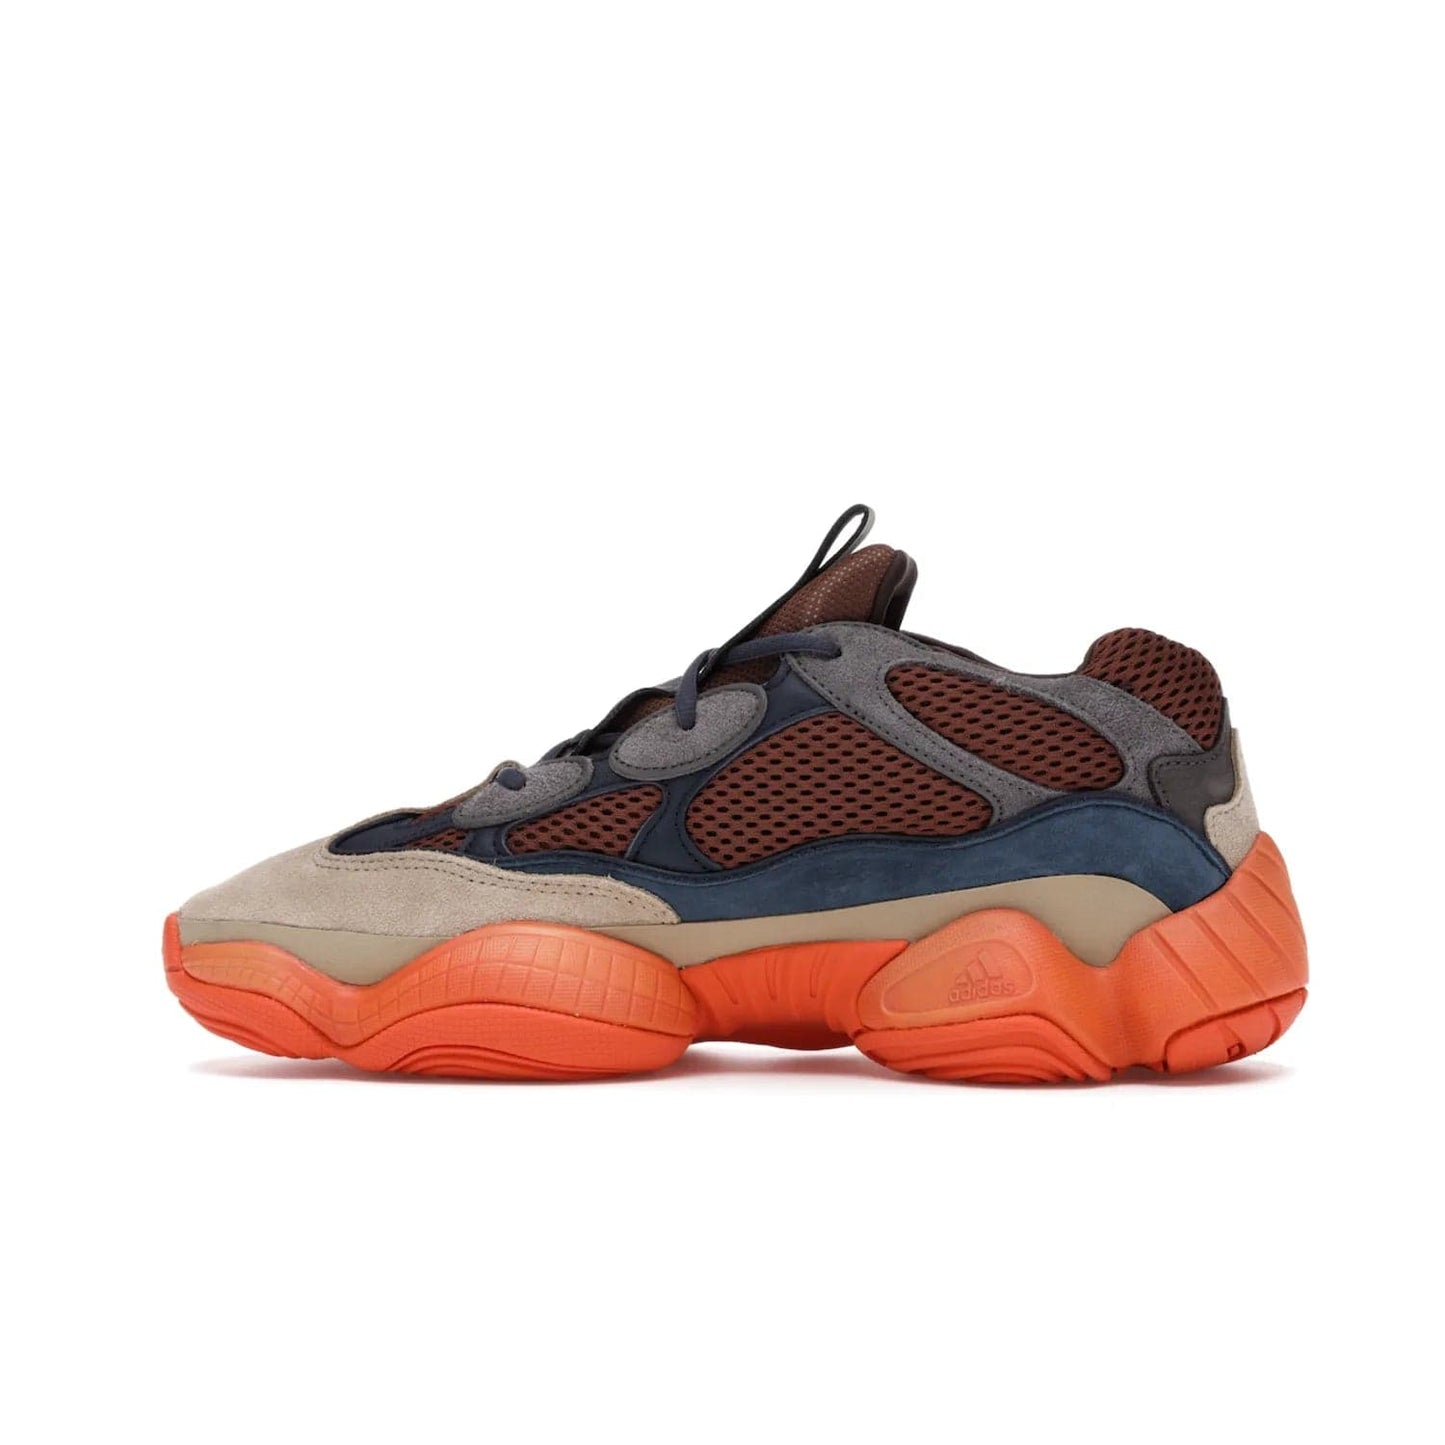 adidas Yeezy 500 Enflame - Image 20 - Only at www.BallersClubKickz.com - Step into style with the adidas Yeezy 500 Enflame. Mix of mesh, leather, and suede layered together to create tonal-brown, dark blue, & orange. Orange AdiPRENE sole provides superior cushioning & comfort. Get yours and experience maximum style.